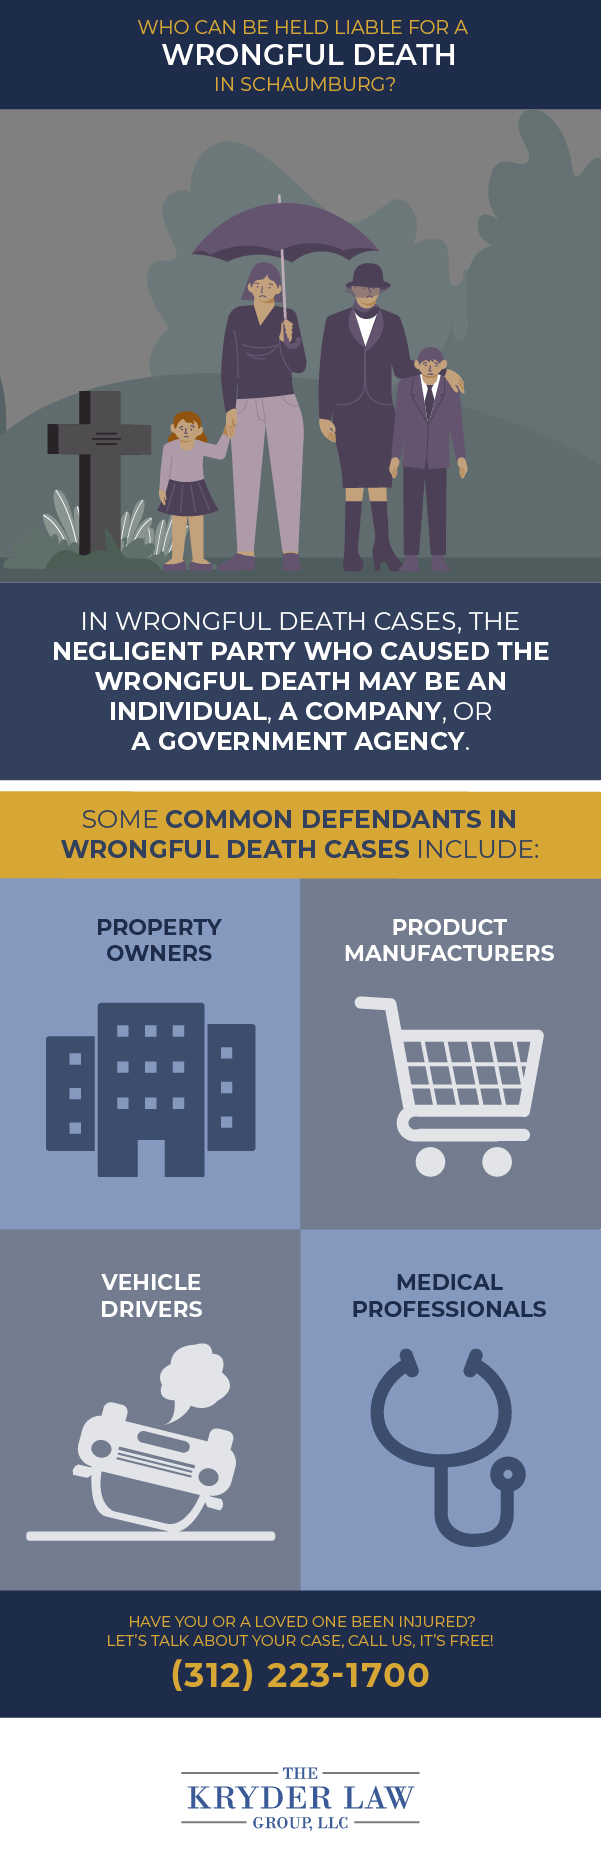 Who Can Be Held Liable for a Wrongful Death in Schaumburg Infographic